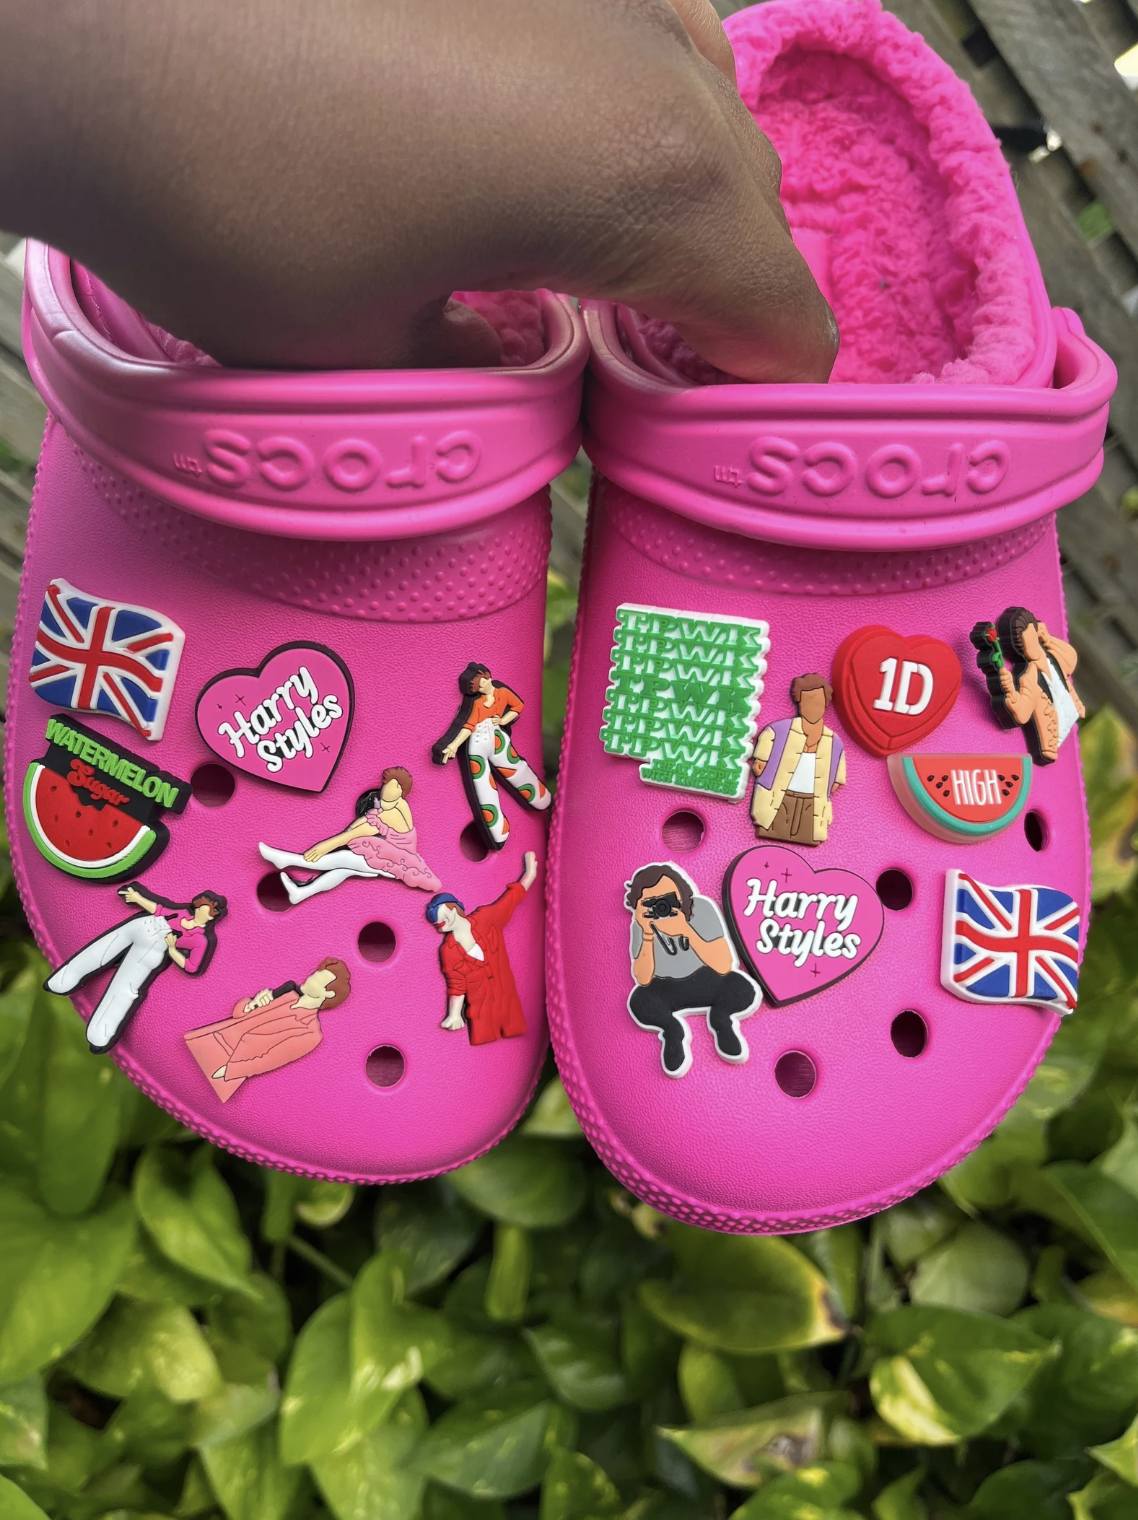 A person holding a pair of Crocs with Harry Styles charms on them